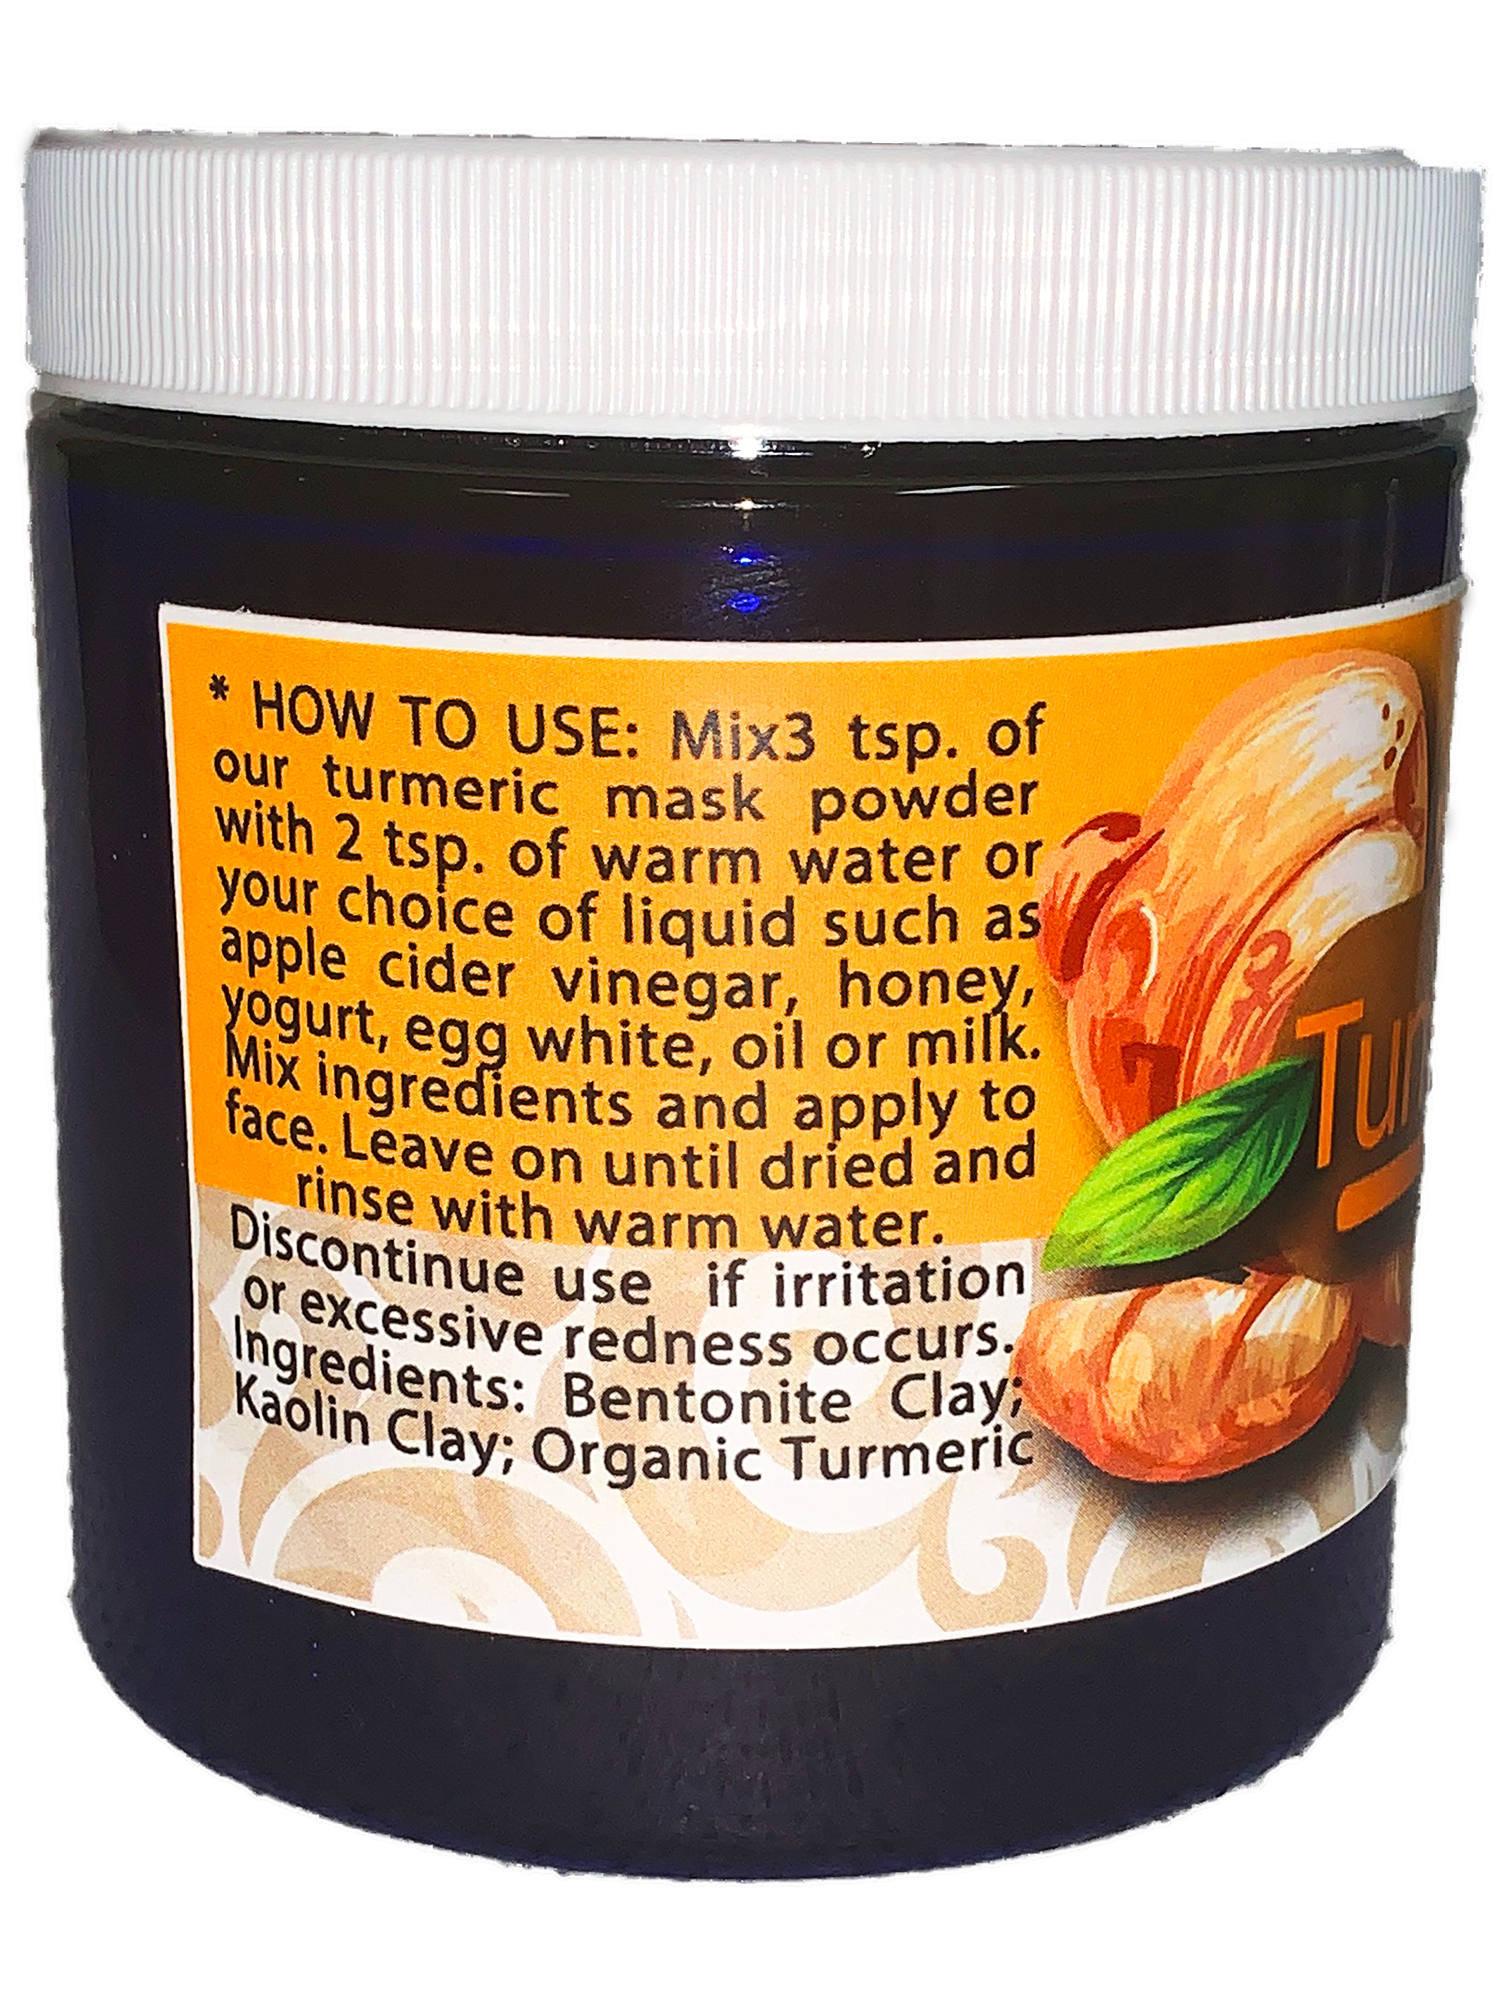 Turmeric Restore Clay Mask | Skin Balancing Mask with Turmeric and 100% Natural Calcium Bentonite Clay | Deep Pore Cleansing Facial & Body Mask | All-Natural Face Mask for Acne | Remove Toxins | Circulation Booster | Detox Clay Face Mask Made in USA - Habbie Enterprise